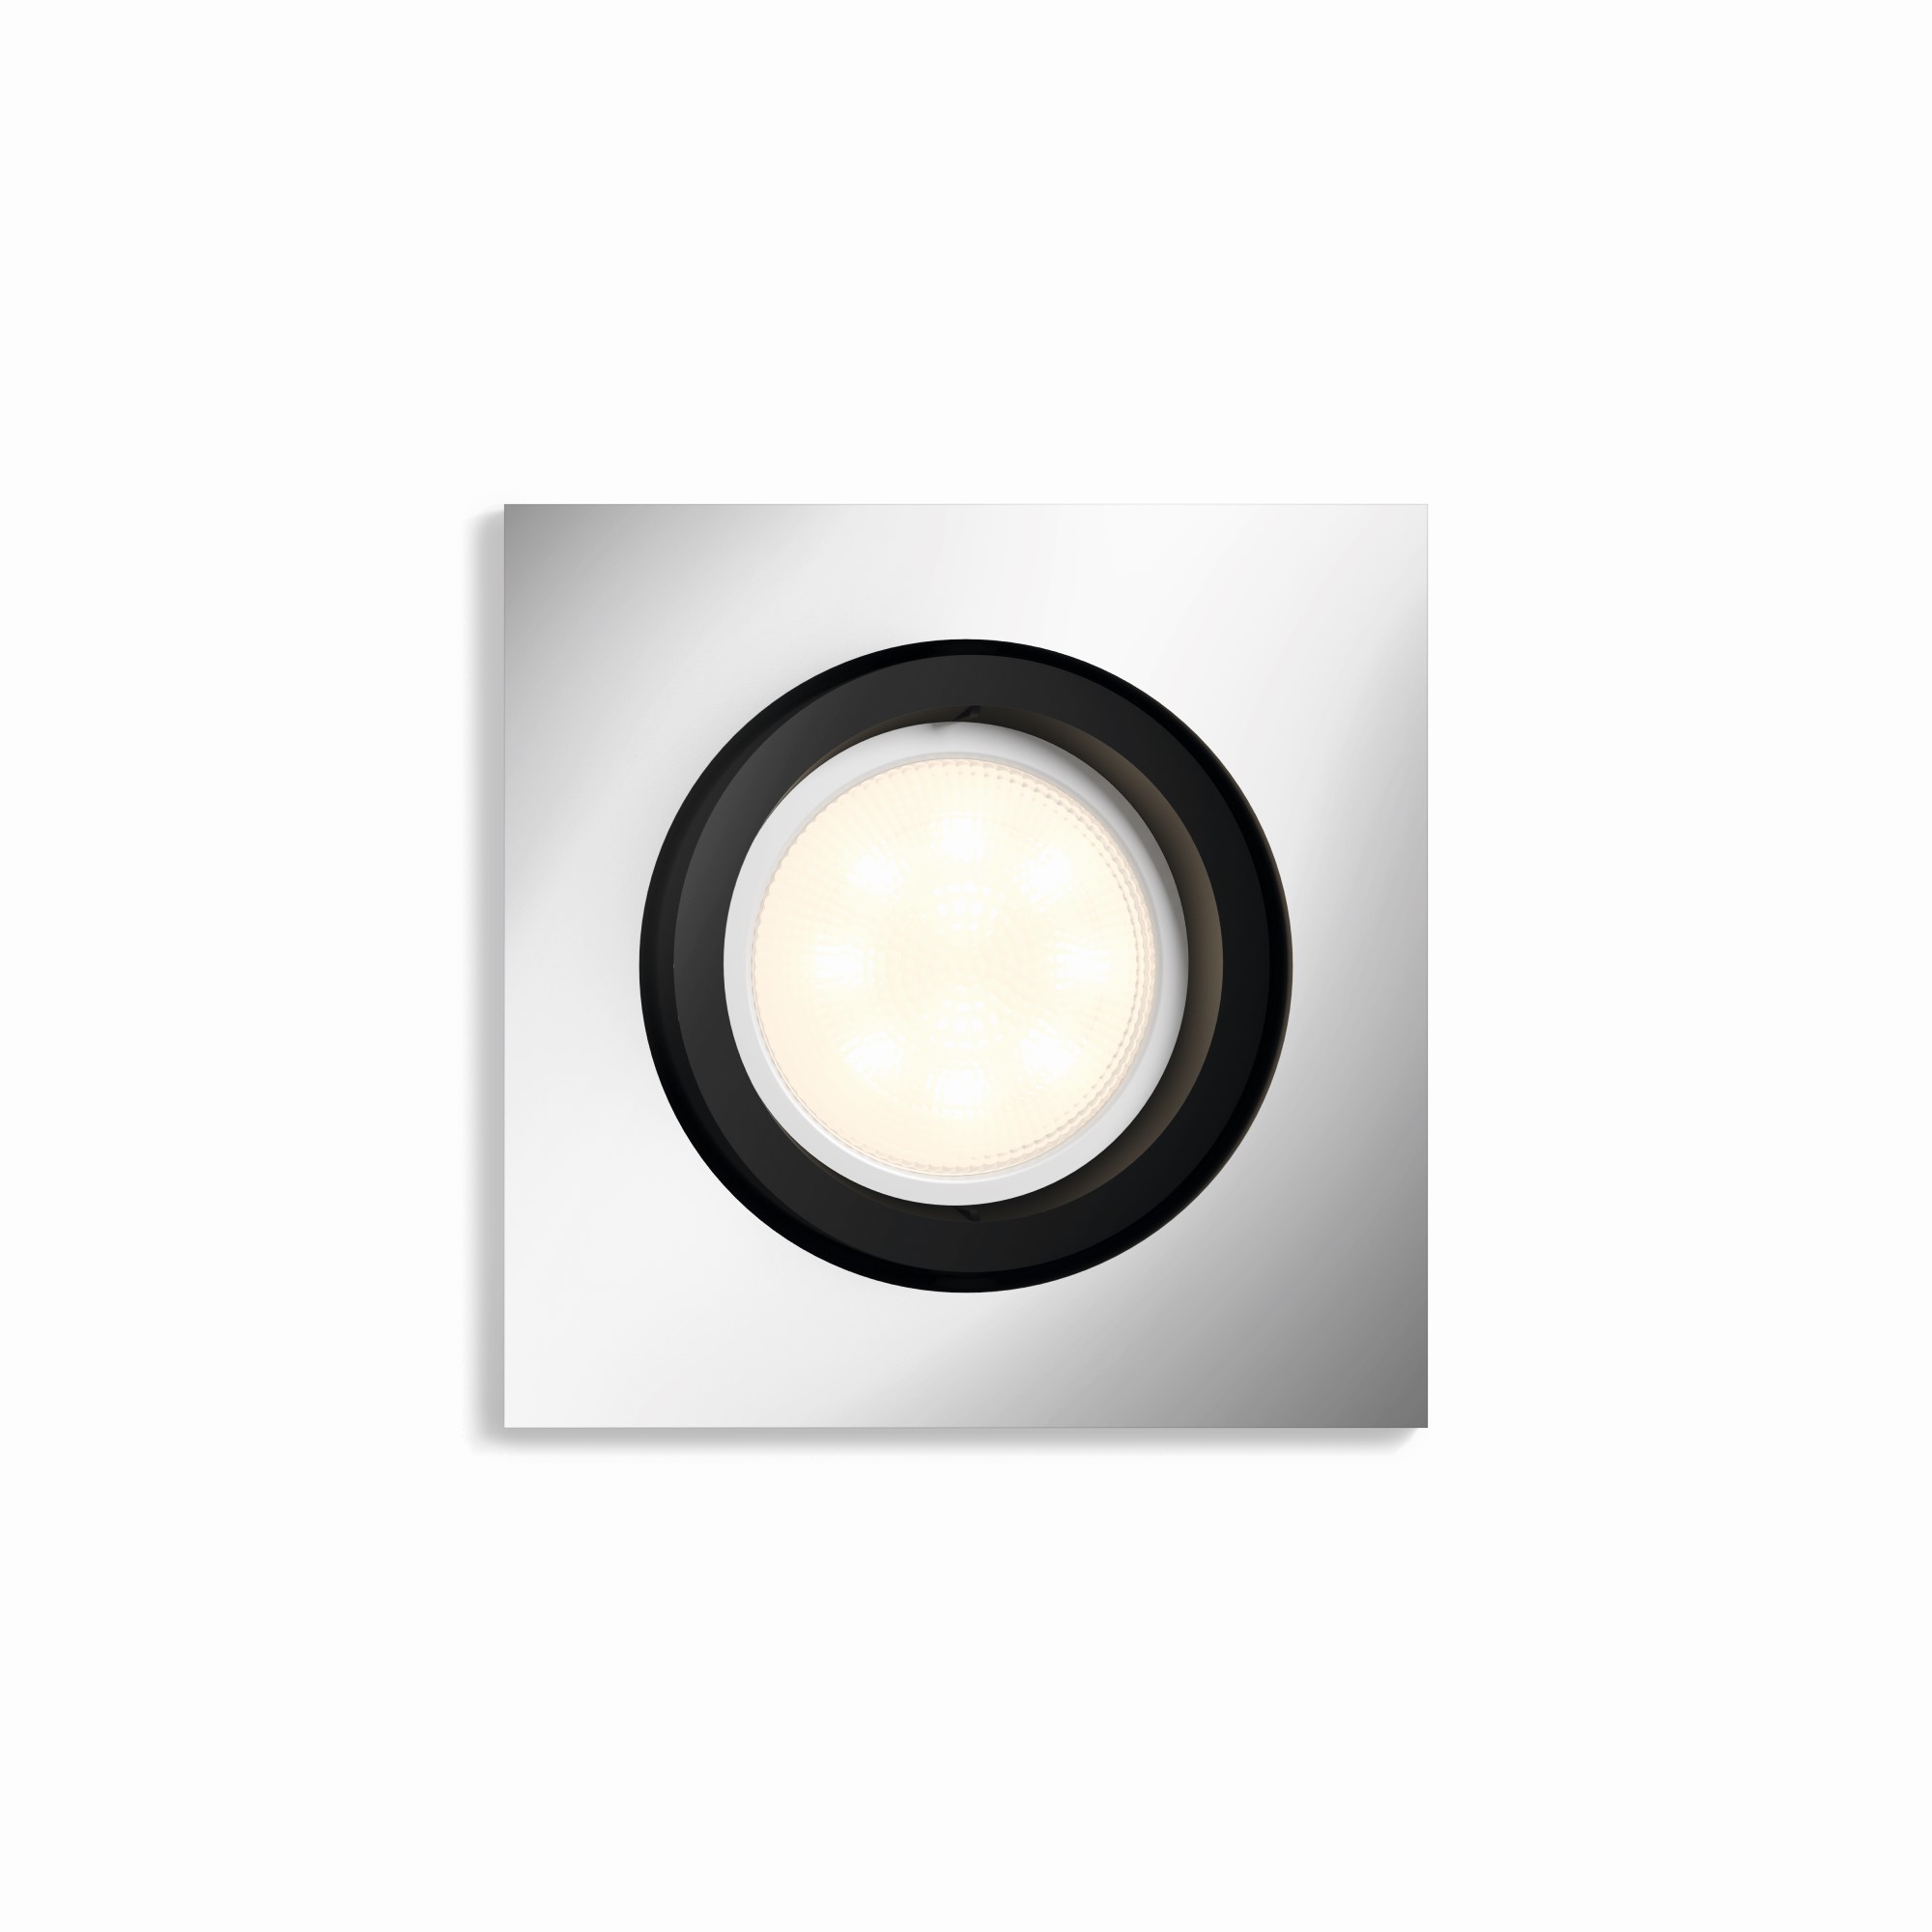 Philips Hue White Ambiance Milliskin LED Downlight square, silver, 250lm, with Dimmer Switch